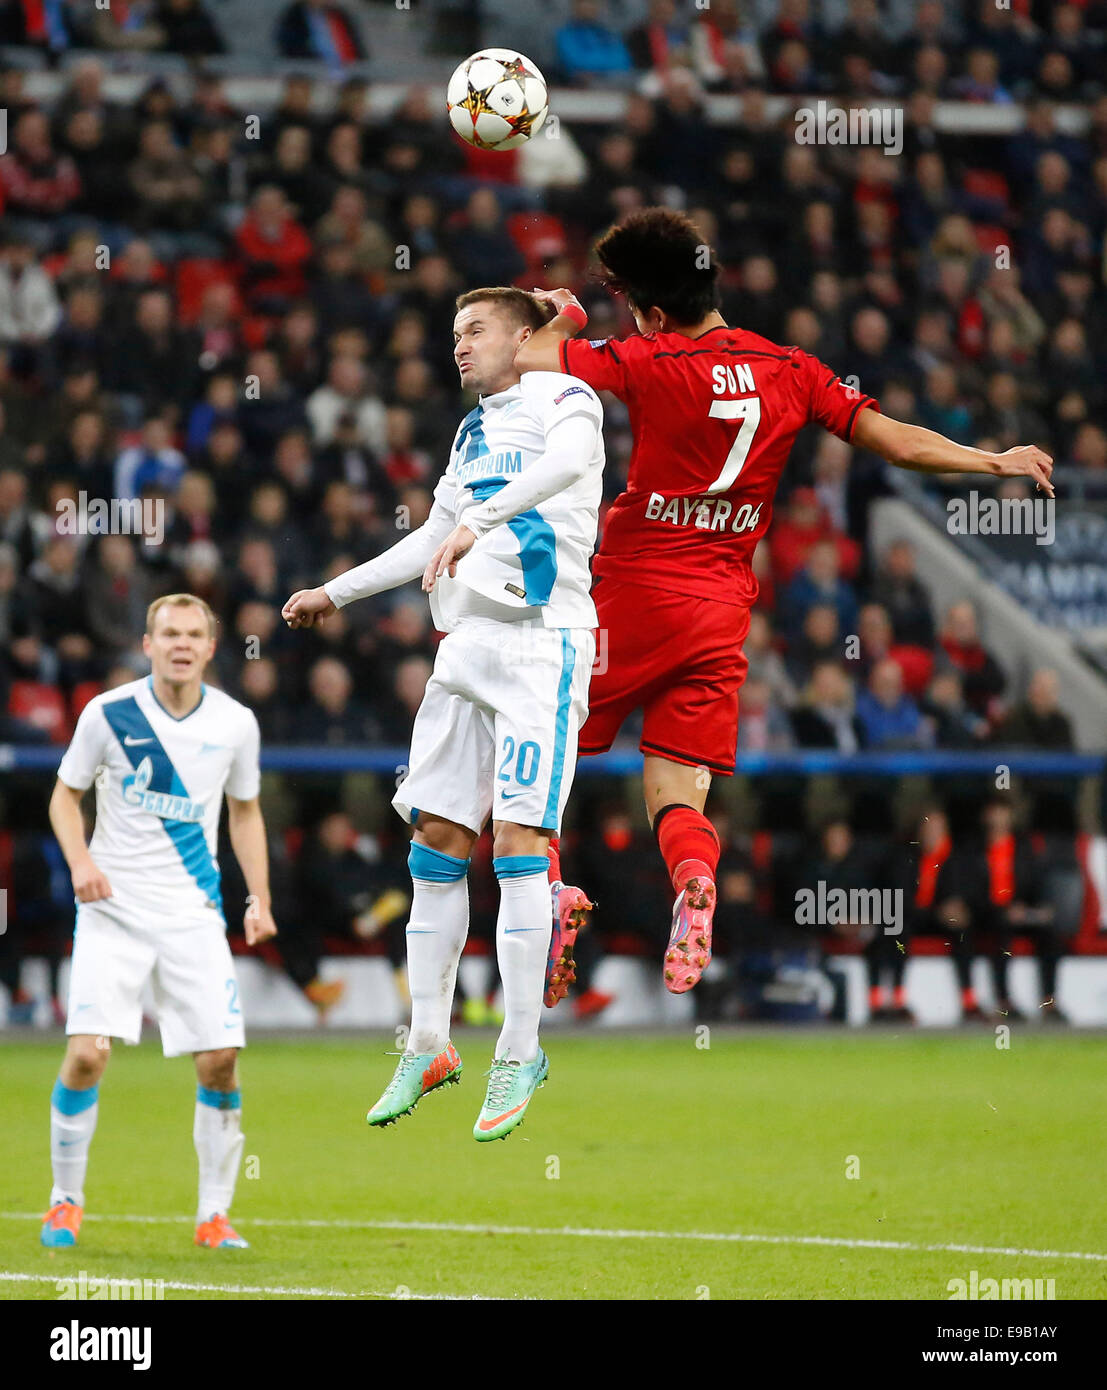 Leverkusen, Germany. 22nd Oct, 2014. Petersburg's Viktor Fayzulin (L) against Leverkusen's Heung-Min Son during the Champions League match between Bayer 04 Leverkusen and St. Petersburg, Bayarena in Leverkusen on October 22., 2014. Credit:  dpa picture alliance/Alamy Live News Stock Photo